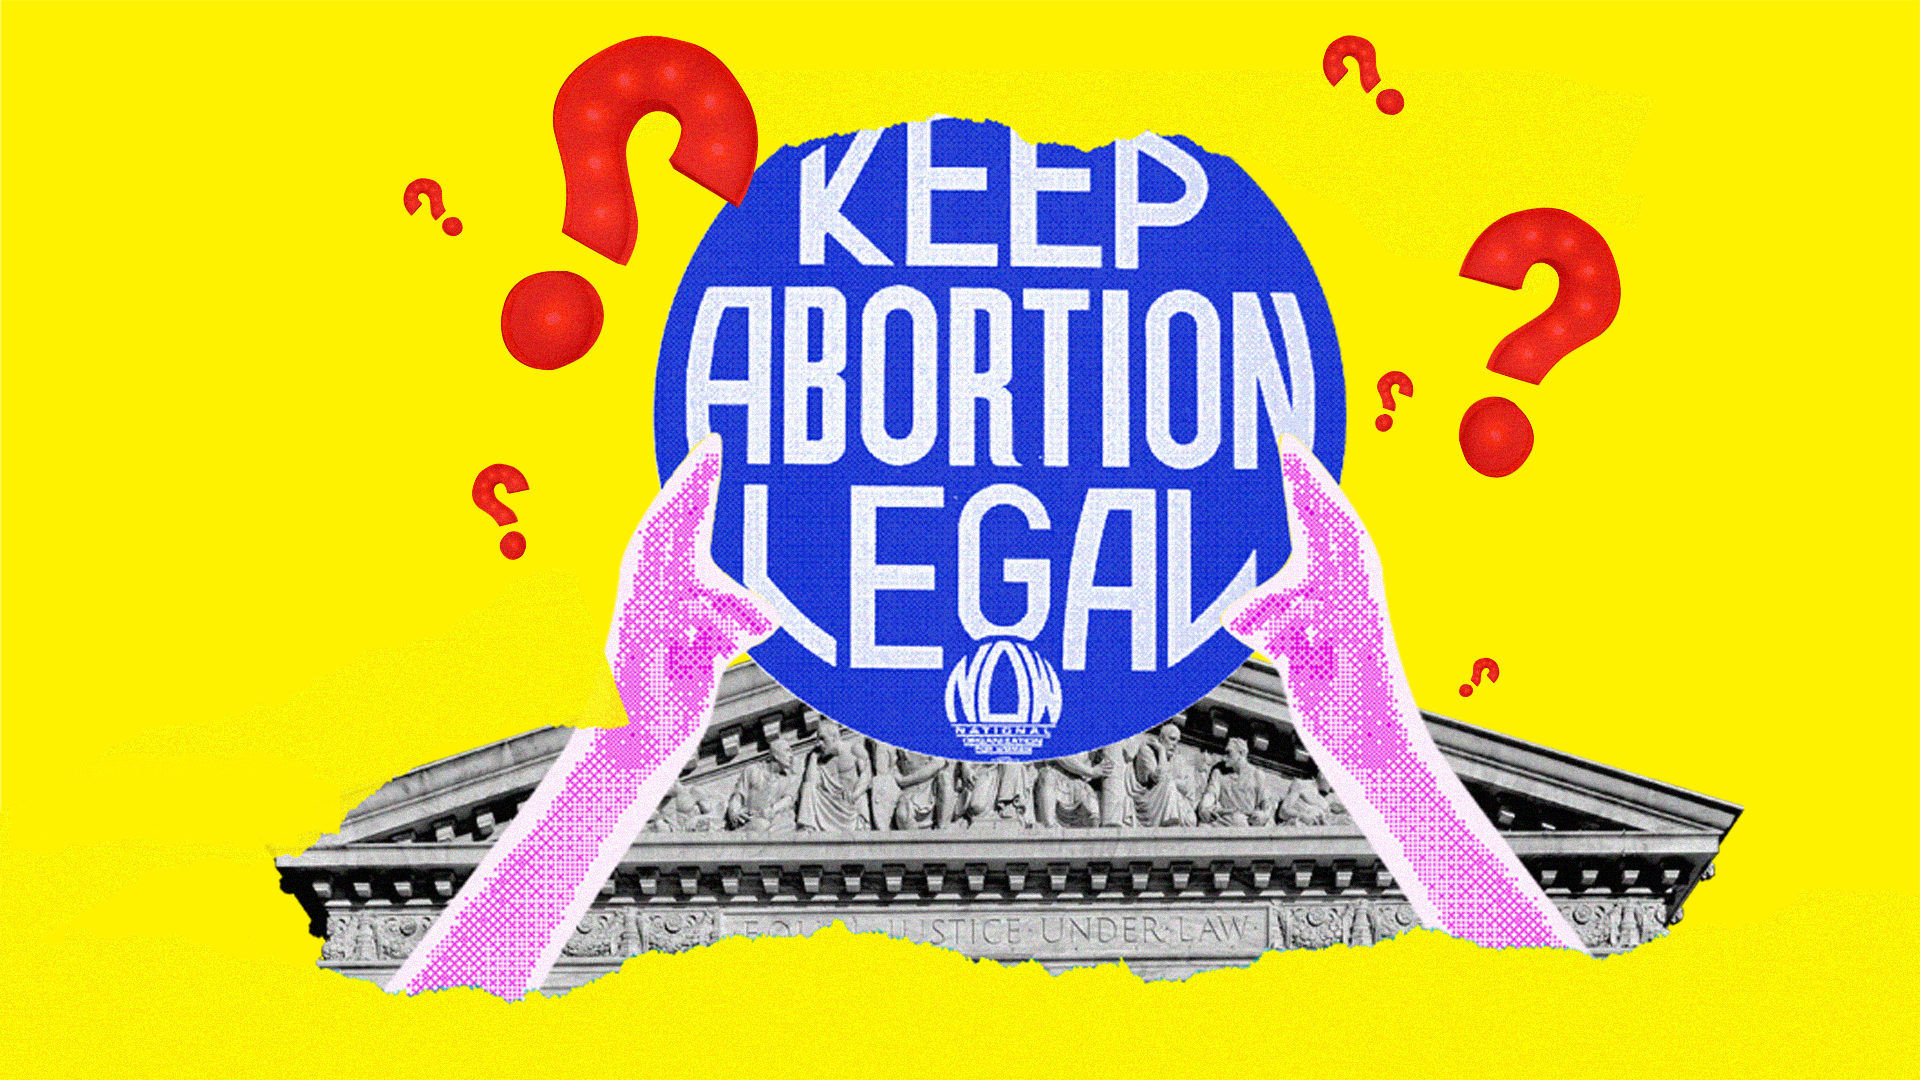 Yellow backgorund and hands holding a globe that reads Keep Abortion Legal surrounded by red question marks.